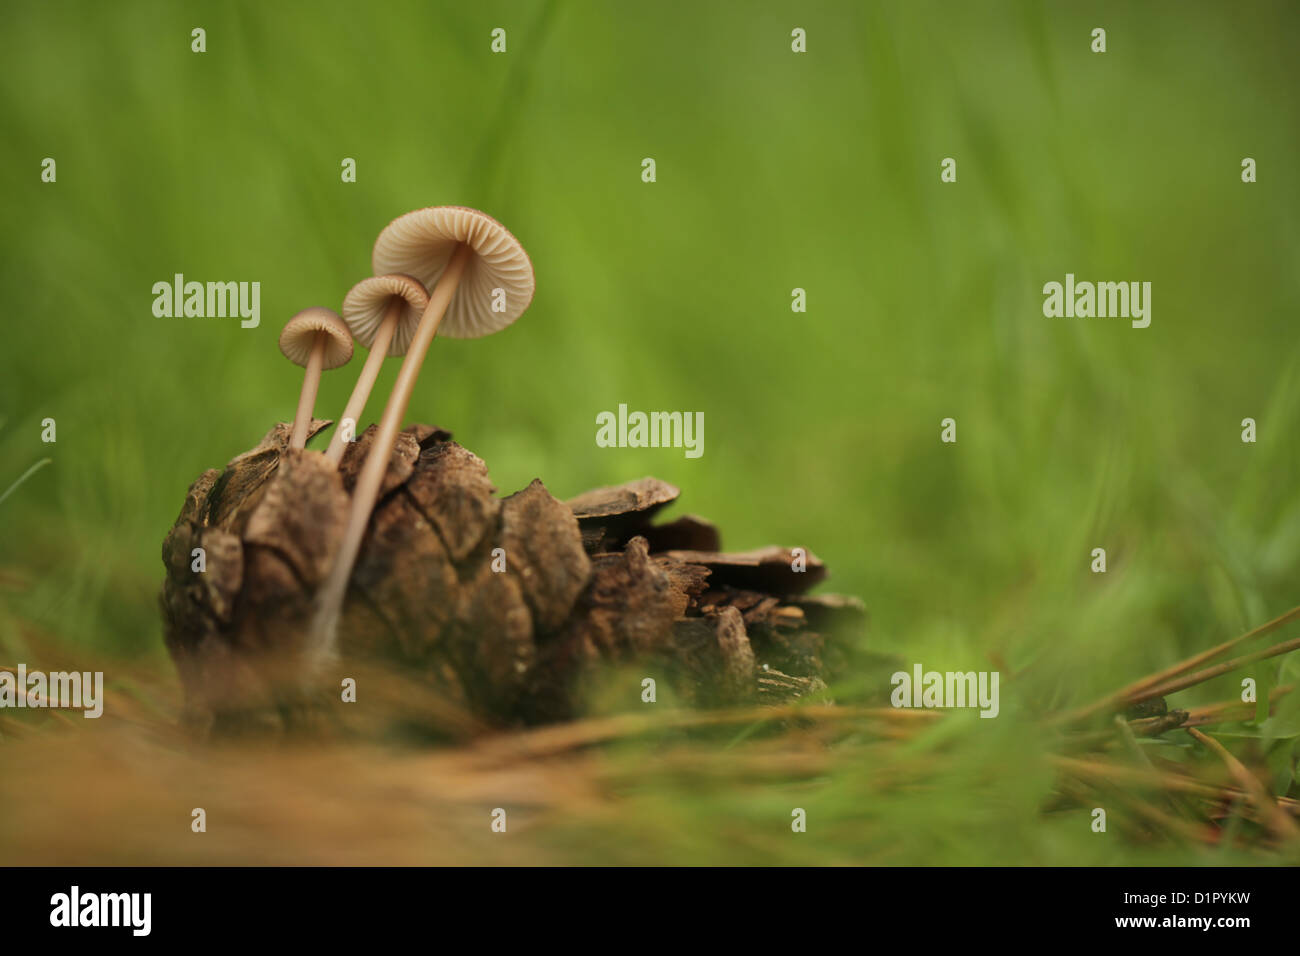 Clustered Pine Cone Bonnet mushrooms (Mycena seynii) growing by a fallen pinecone. Stock Photo